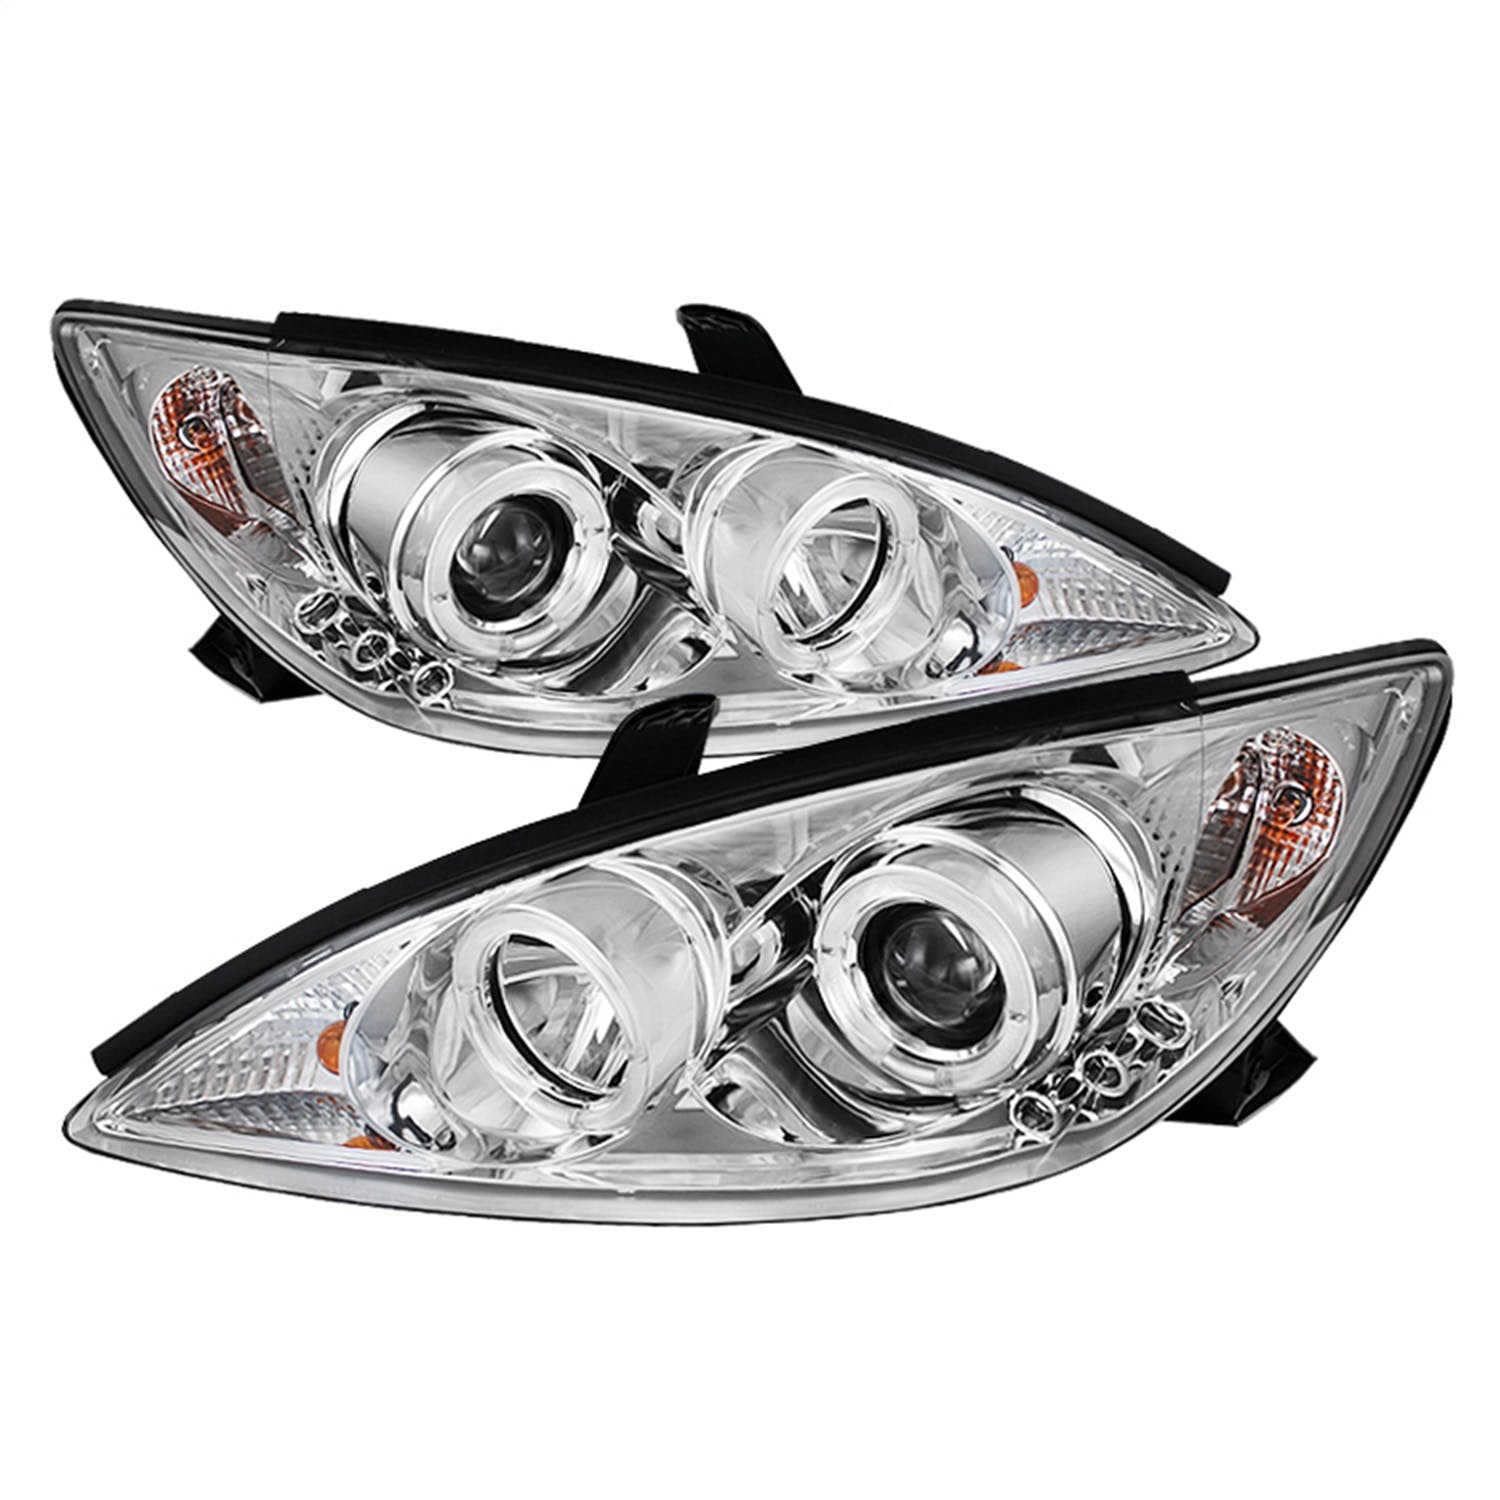 Spyder Auto 5064318 (Spyder) Toyota Camry 02-06 Projector Headlights-LED Halo-LED ( Replaceable LEDs